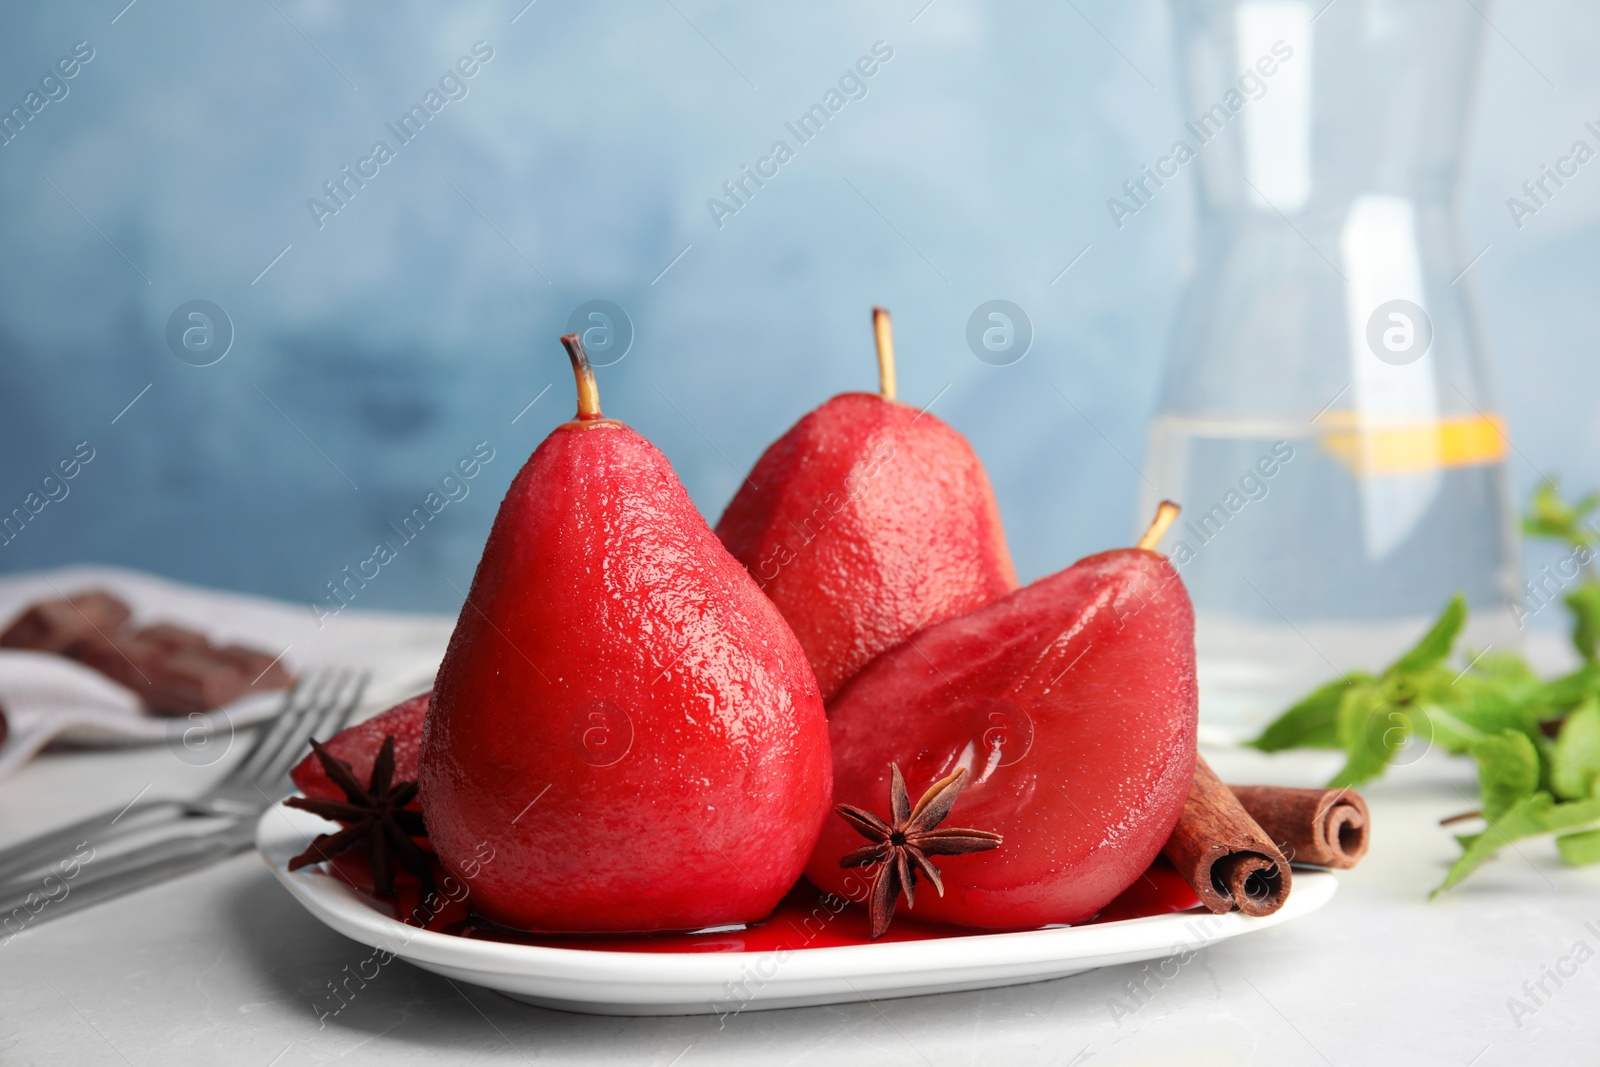 Image of Delicious mulled wine poached pears served on table